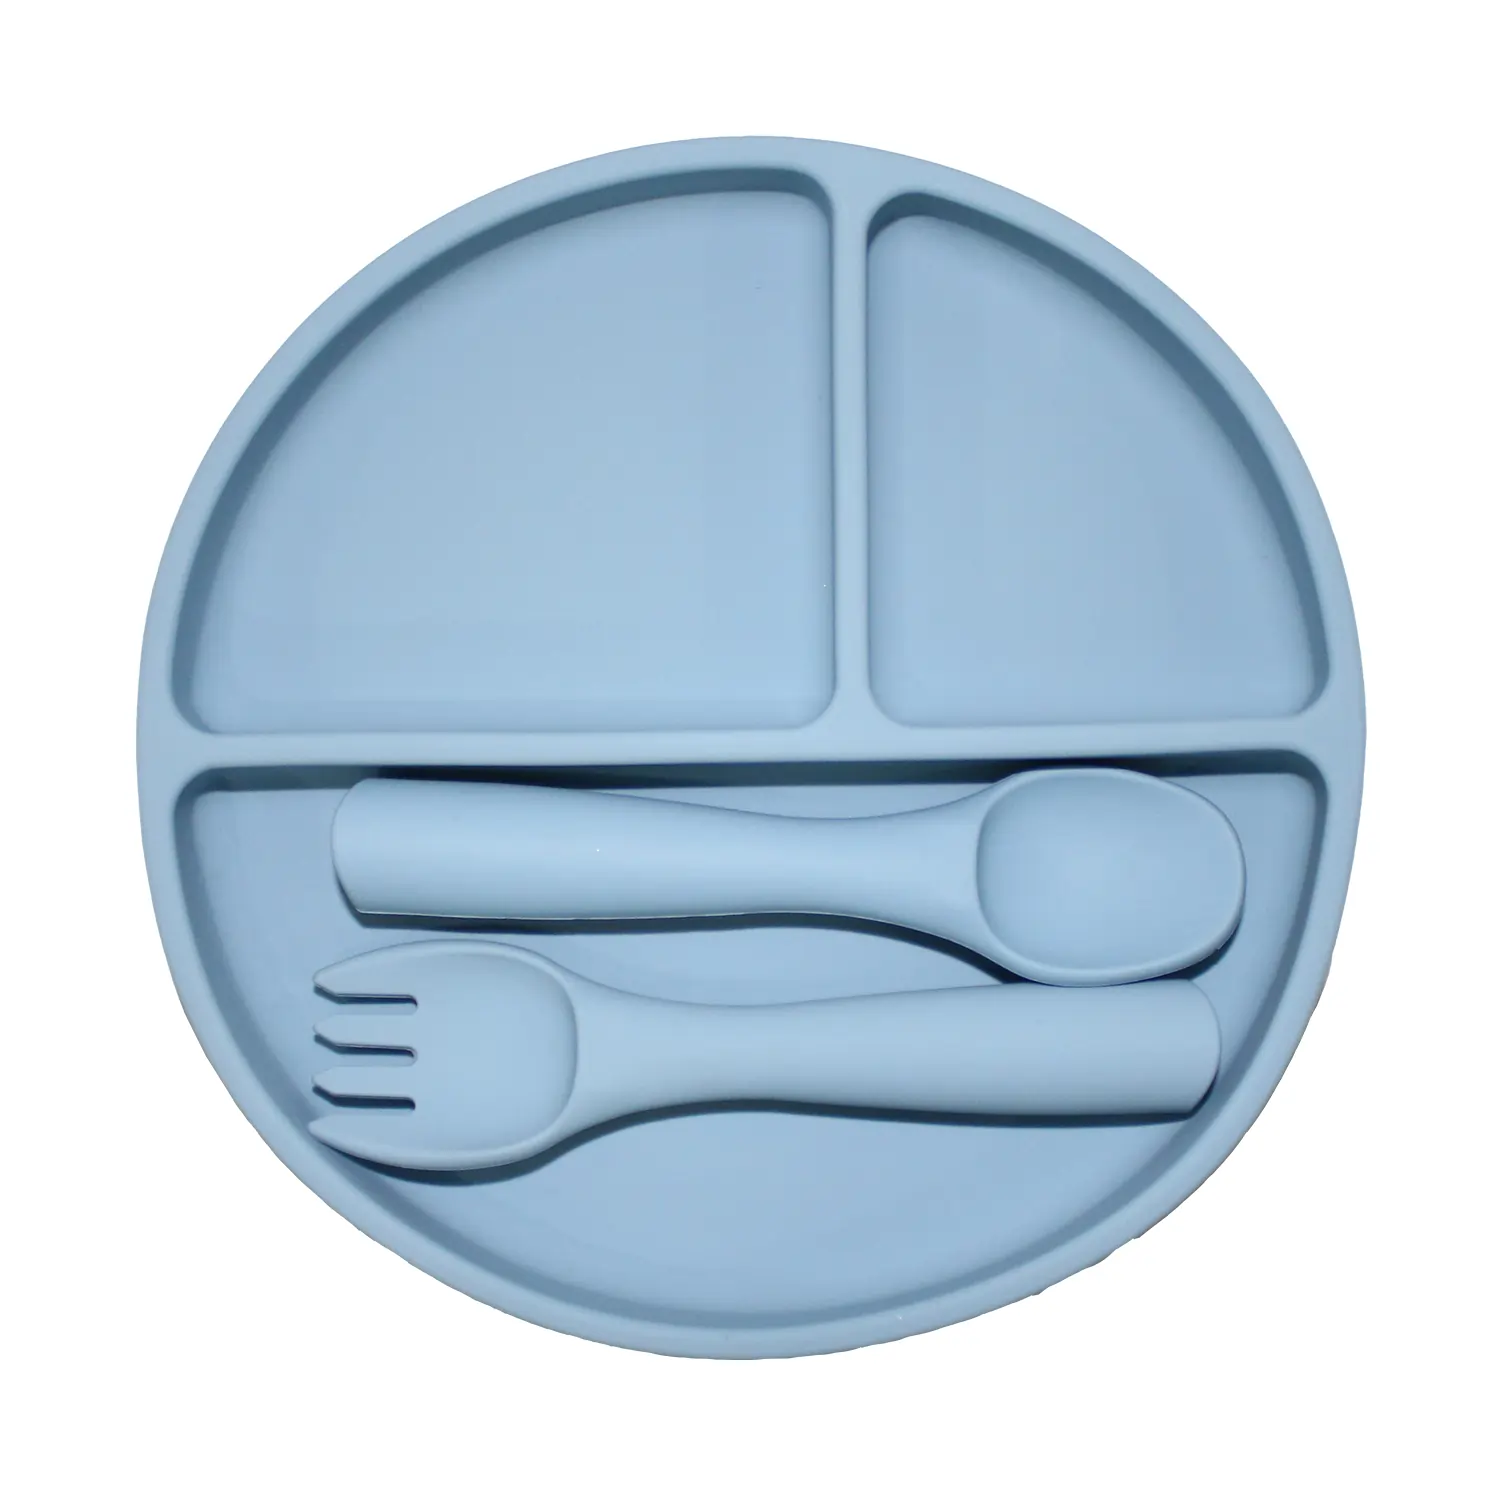 Blue Silicone Round Plate Set